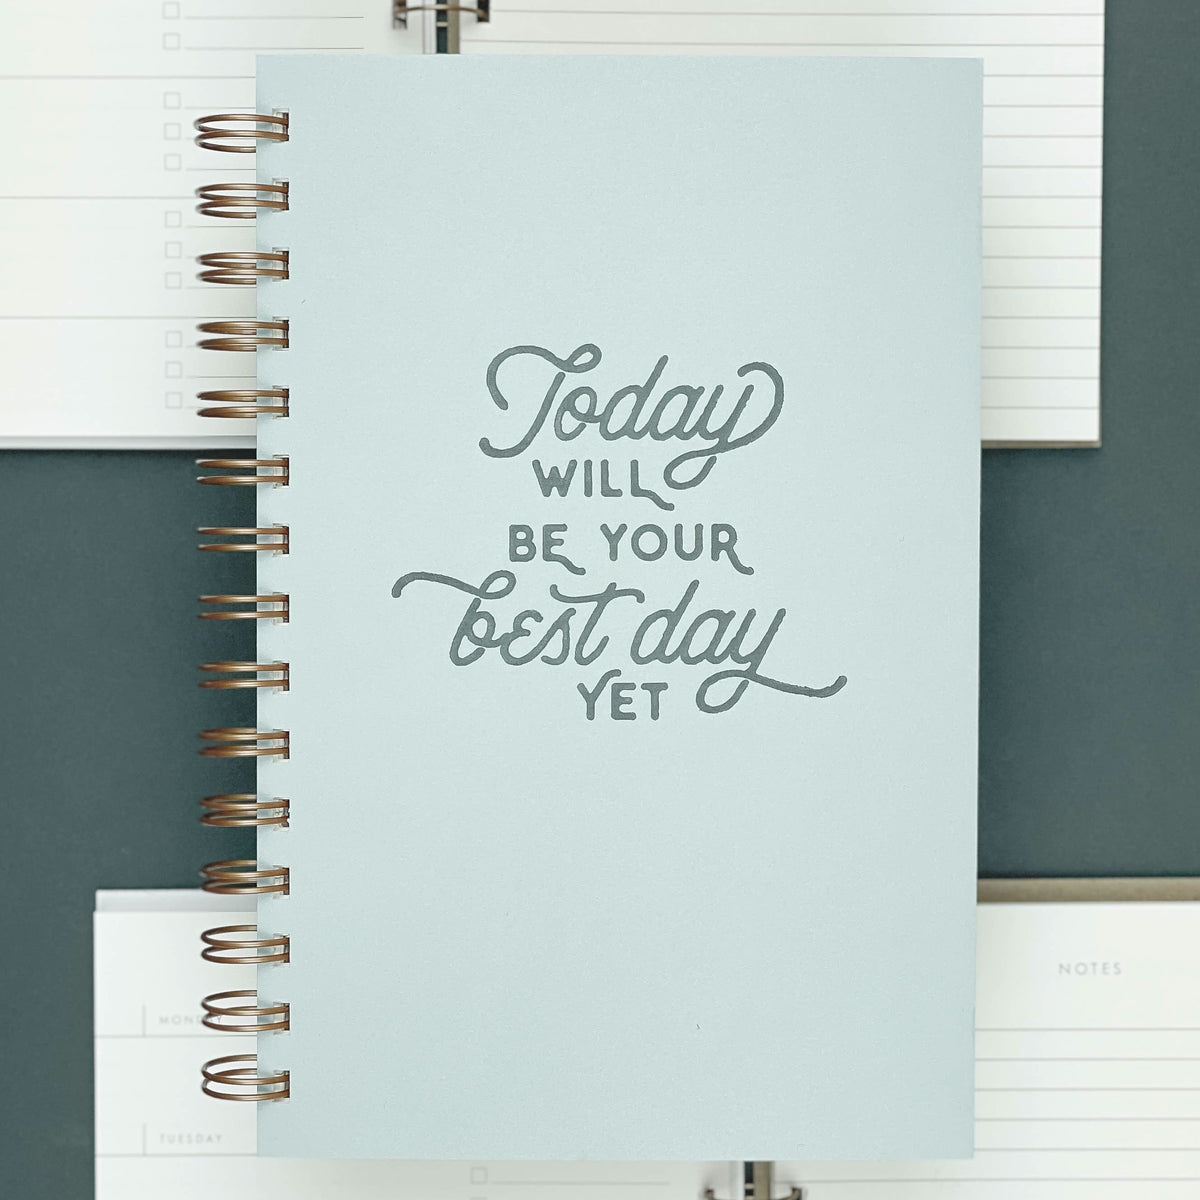 Light blue hardcover spiral bound journal planner titled "Today will be your best day yet"